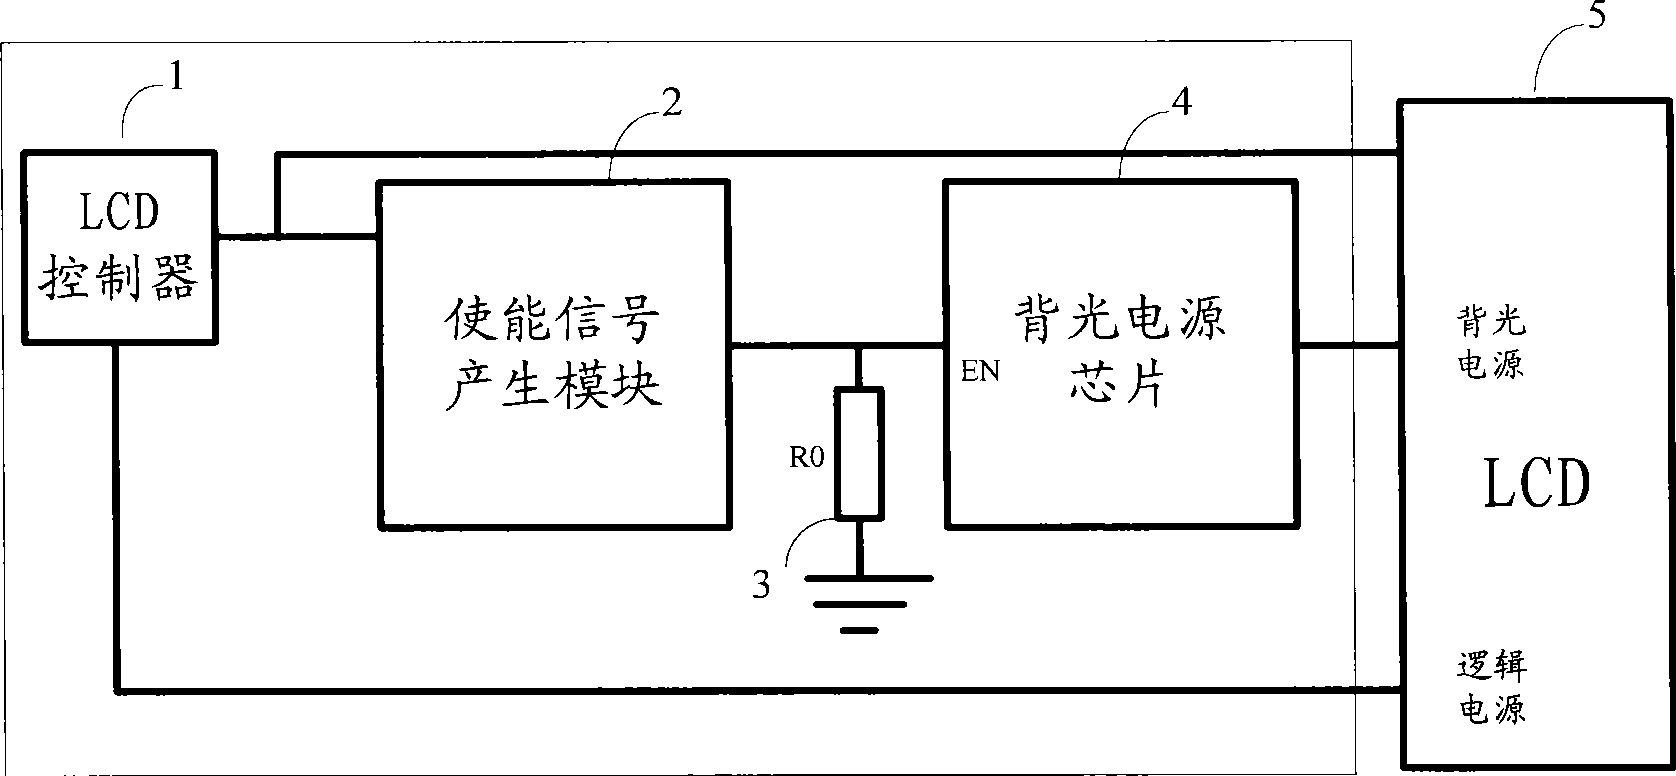 Control device for starting LCD power supply